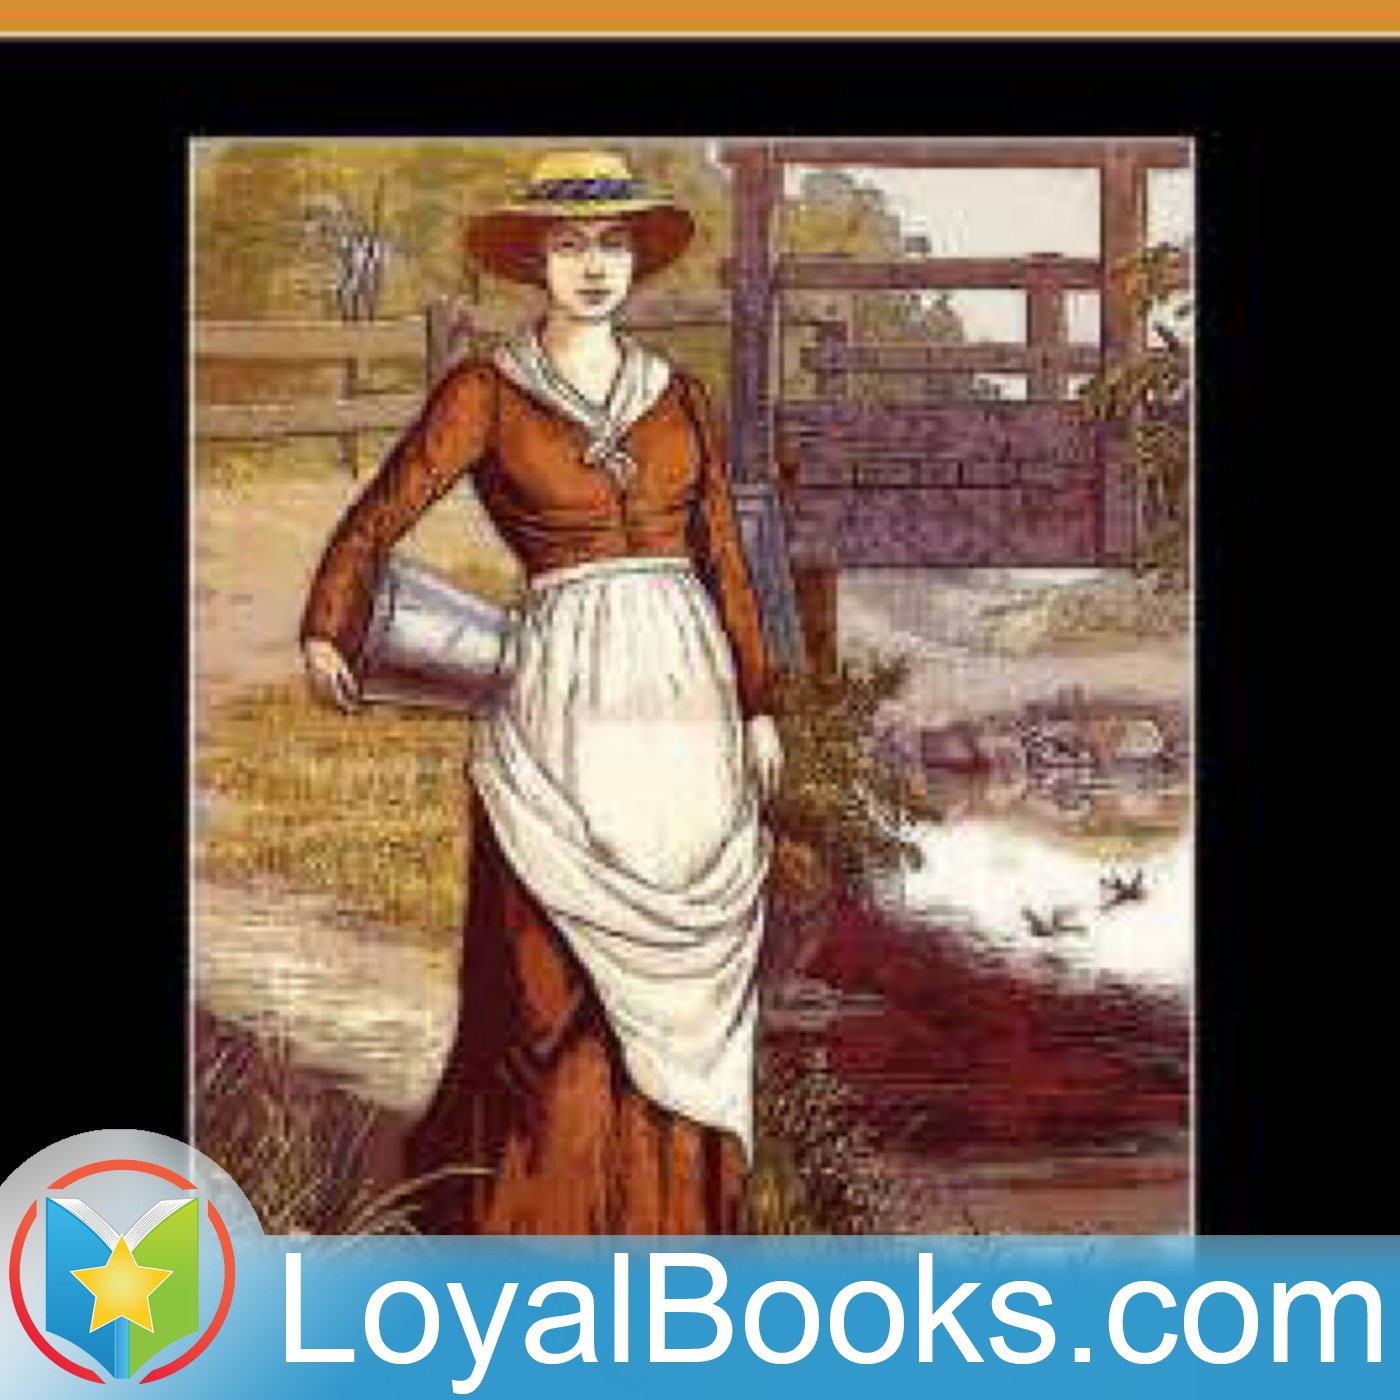 A Lady's Life on a Farm in Manitoba by Mrs. Cecil Hall